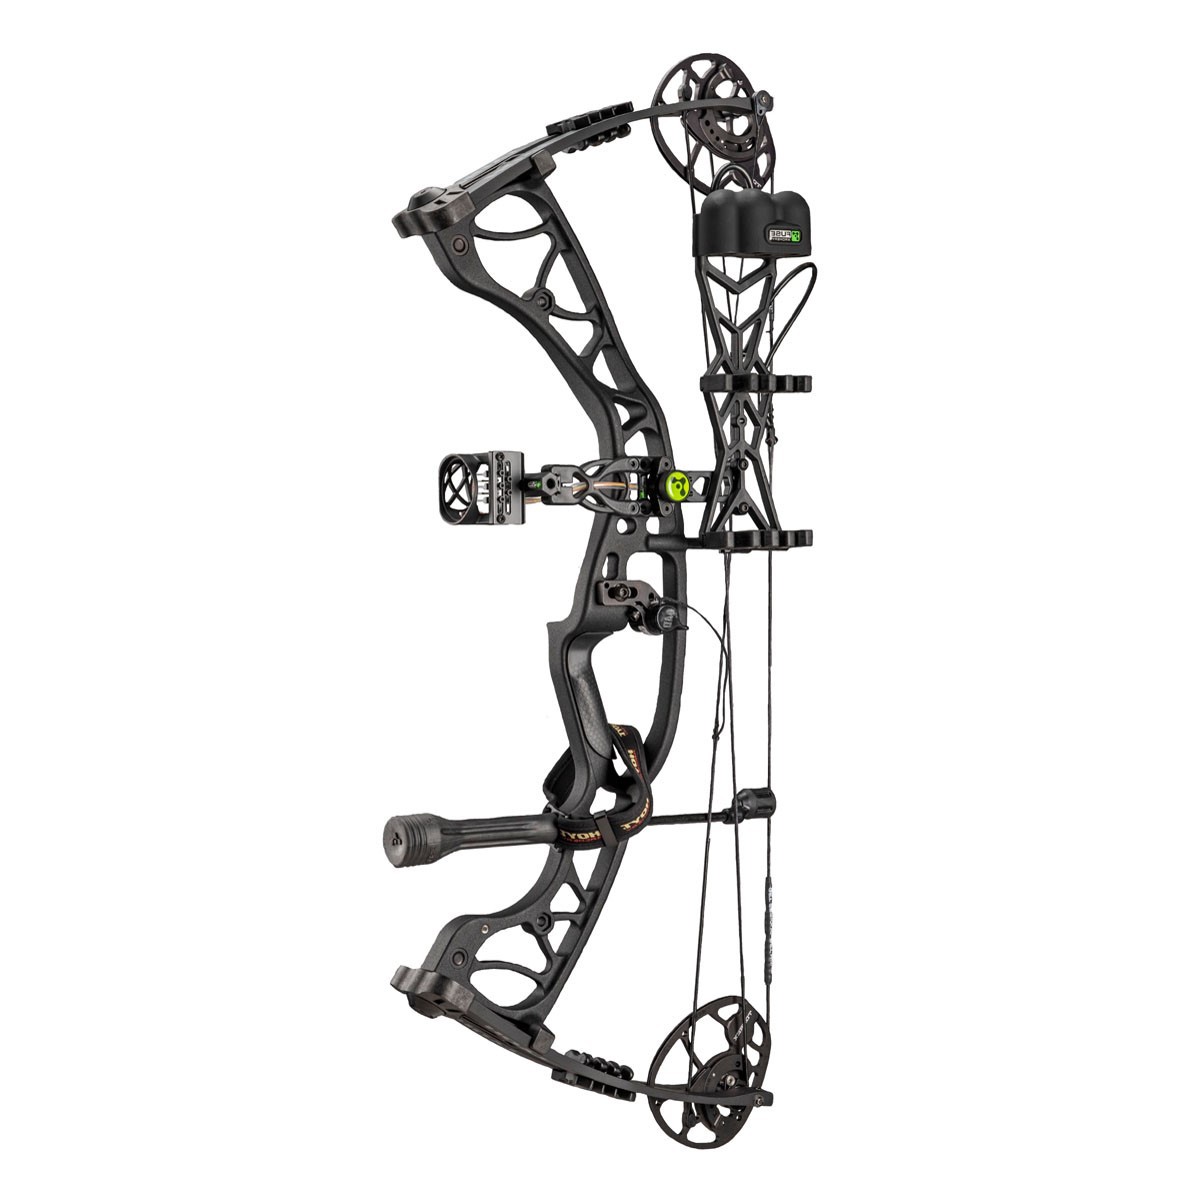 Hoyt Compound Bow Torrex Package